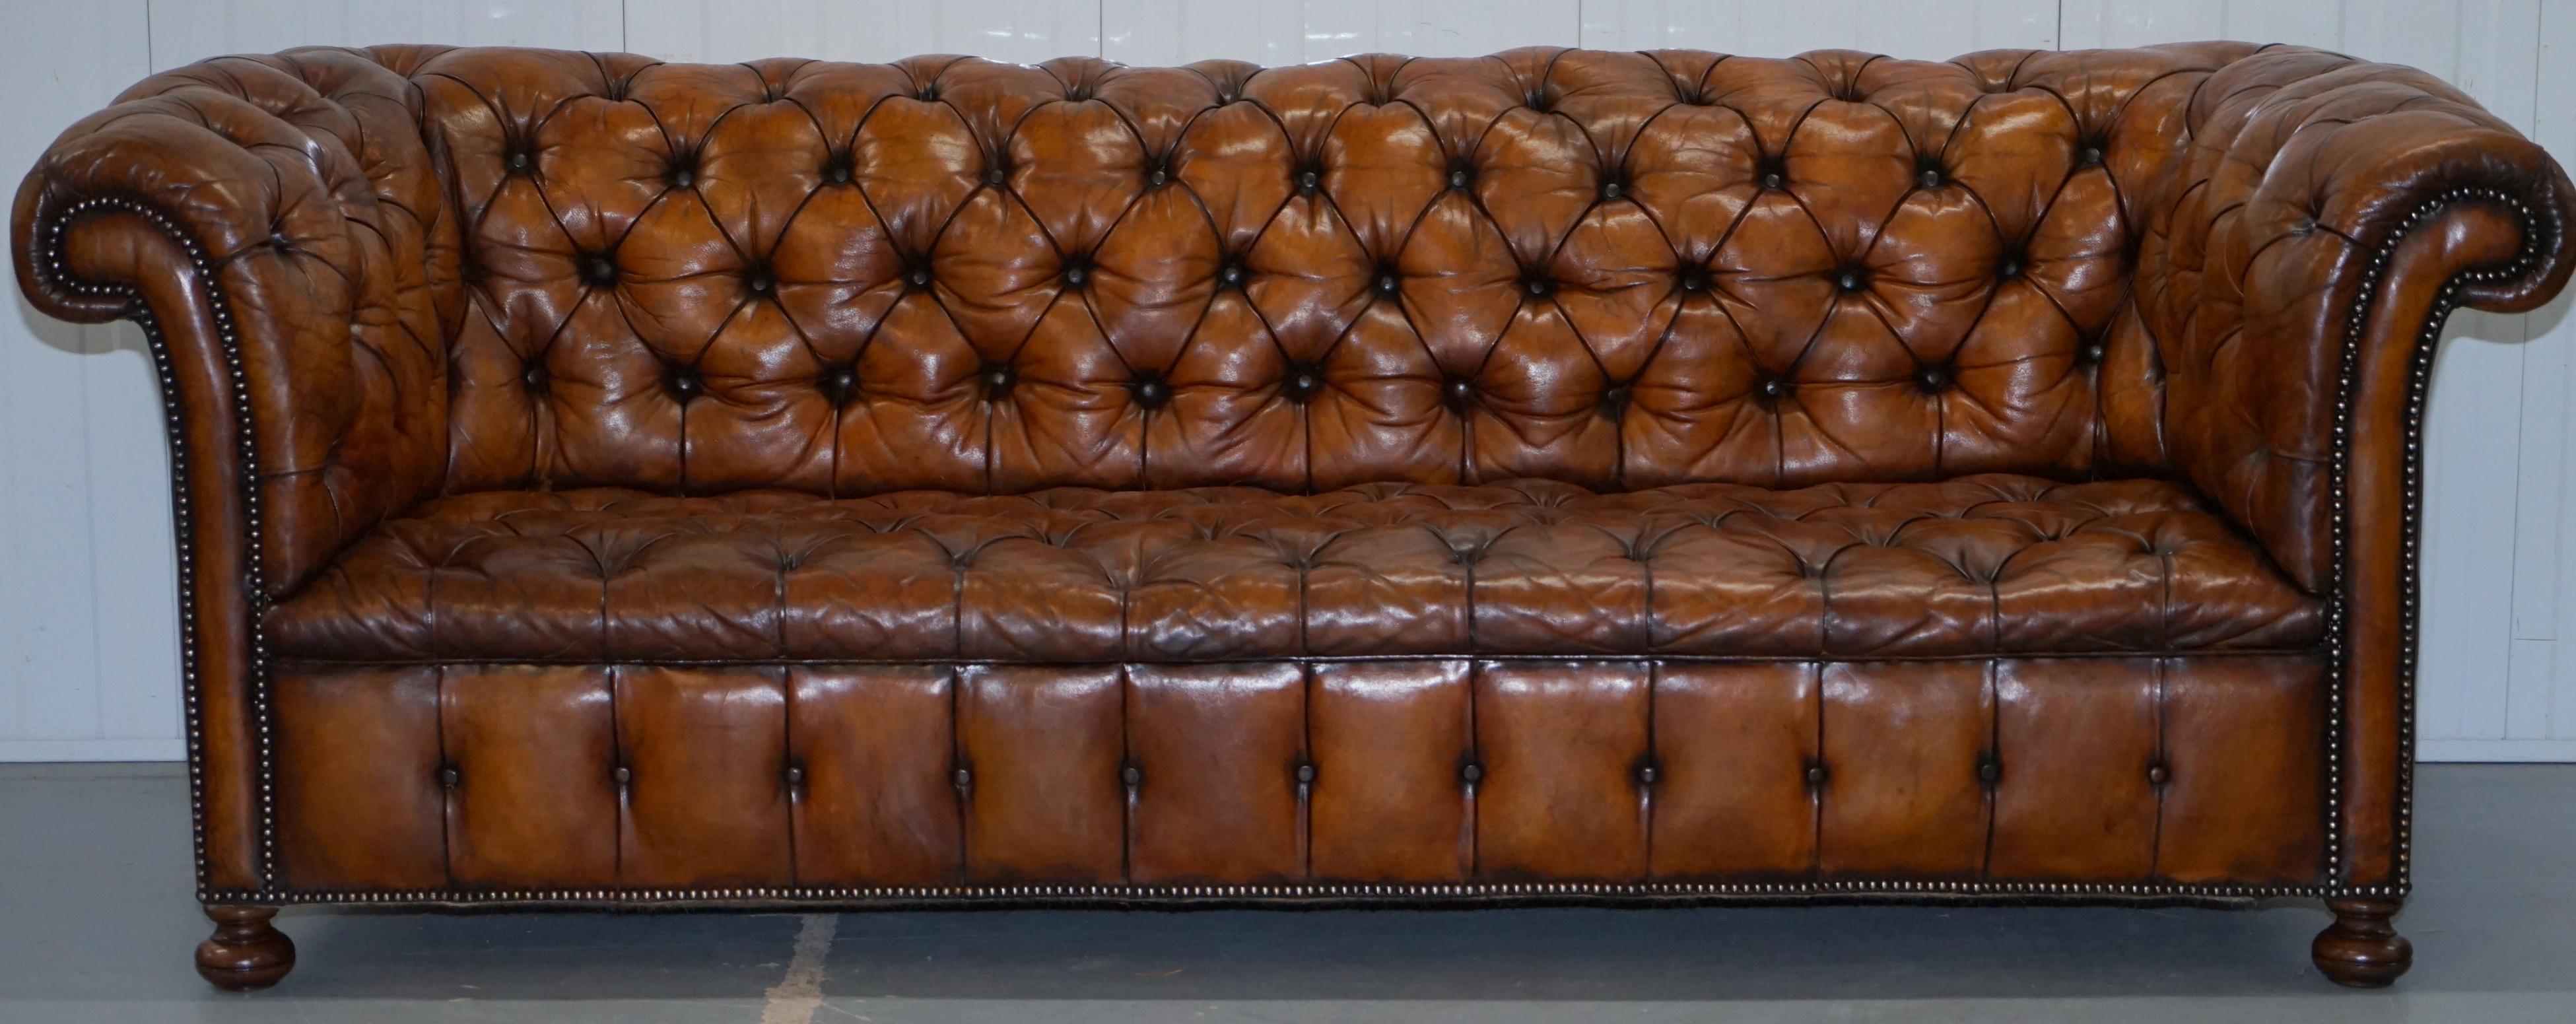 We are delighted to offer for sale this very rare fully restored circa 1860 hand dyed Whiskey brown leather Chesterfield sofa with original horse hair padding and coil sprung all over

This sofa is actually a very rare model, it is fully sprung